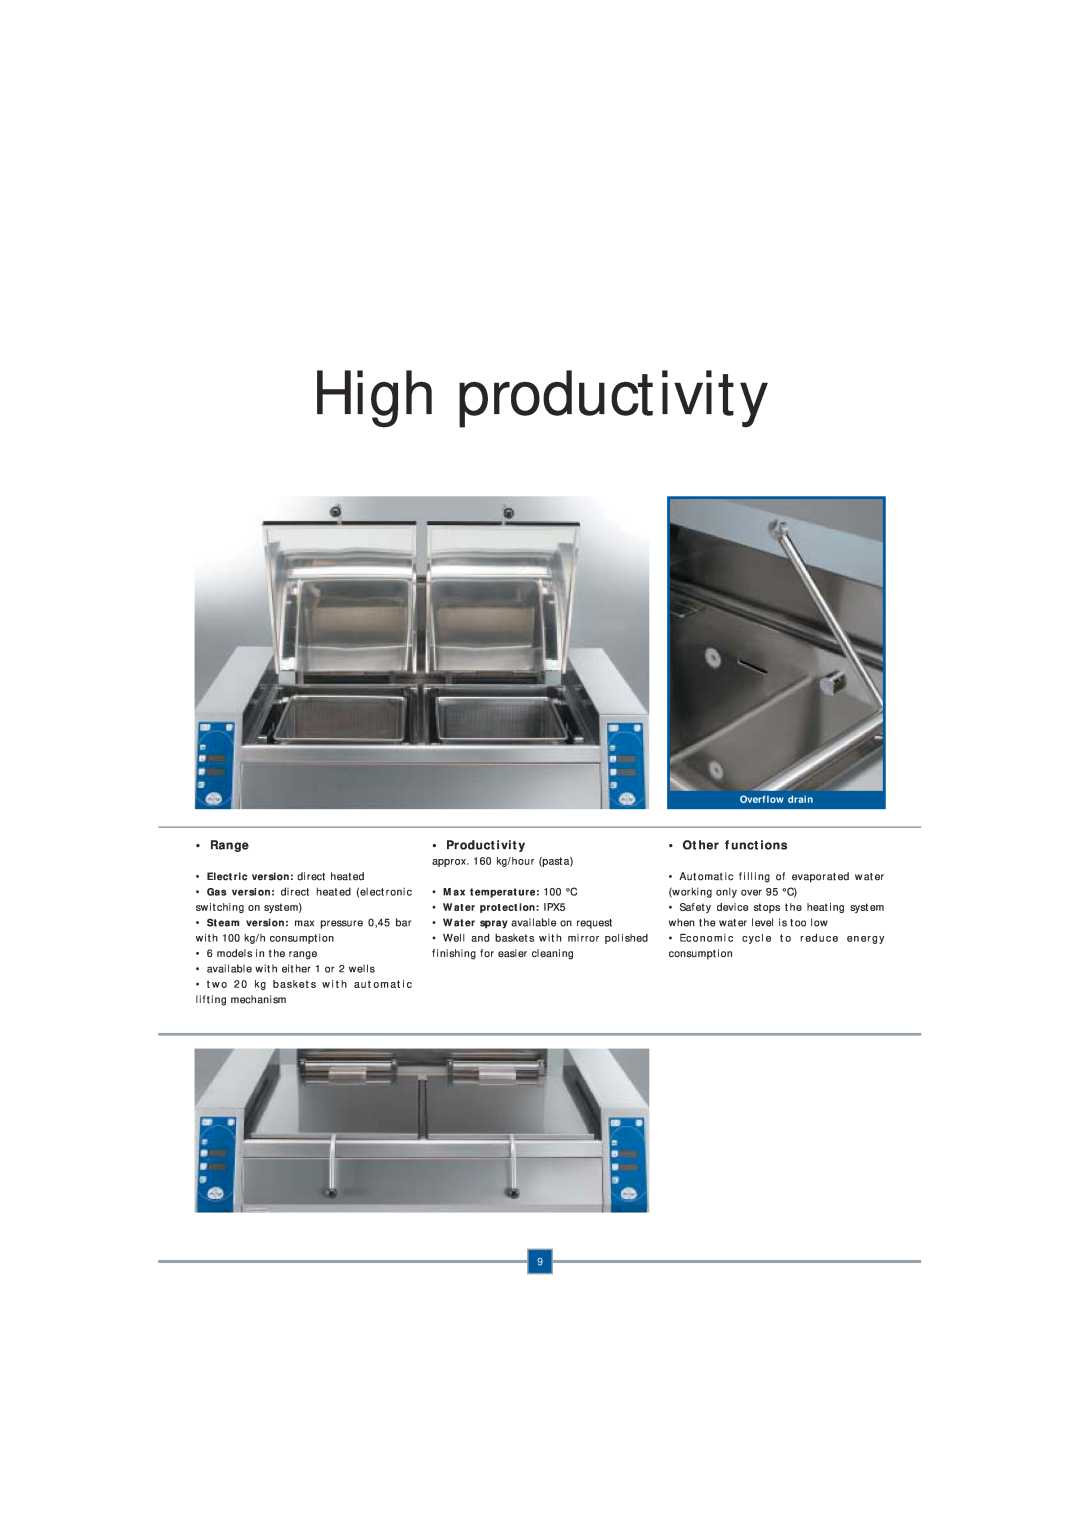 Electrolux Fryer High productivity, Range, Productivity, Other functions, Overflow drain, Electric version direct heated 